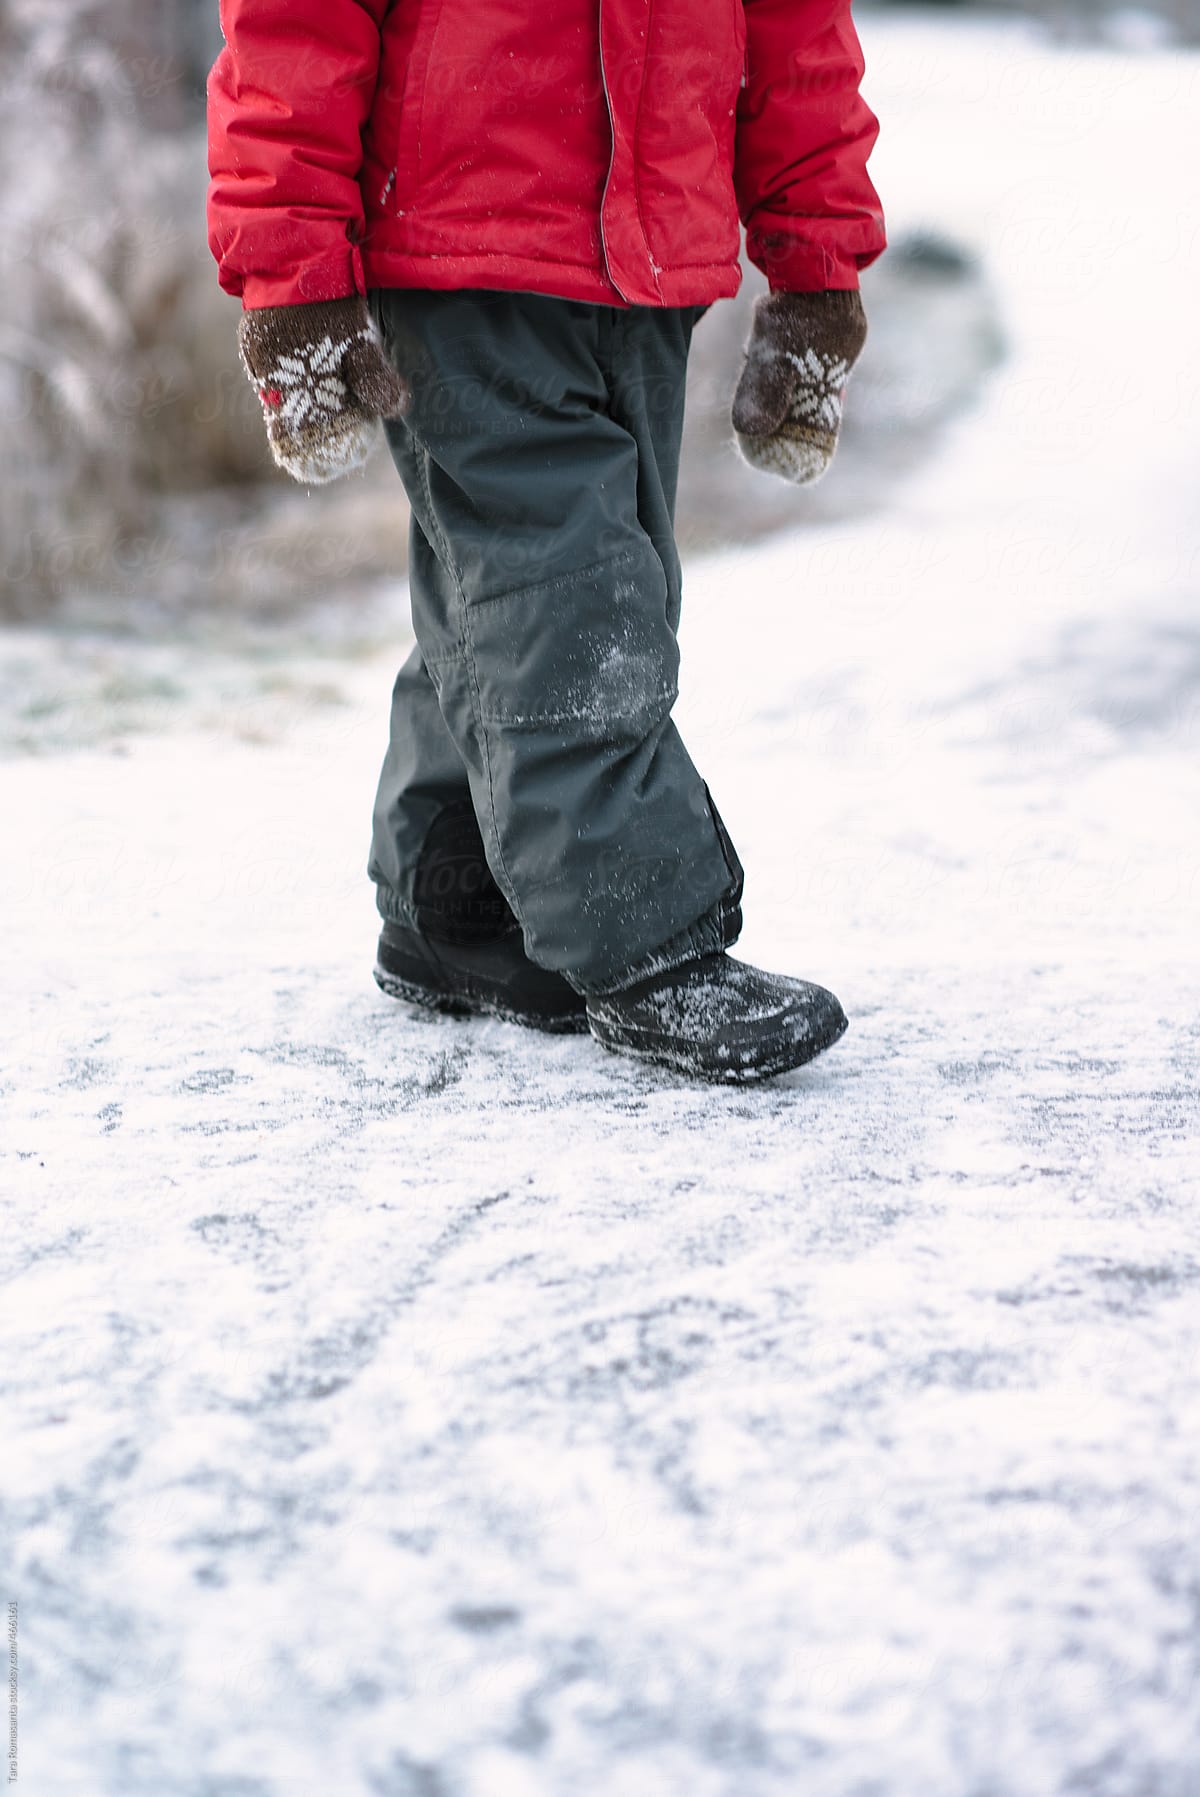 child in snow pants, mittens, boots and winter jacket